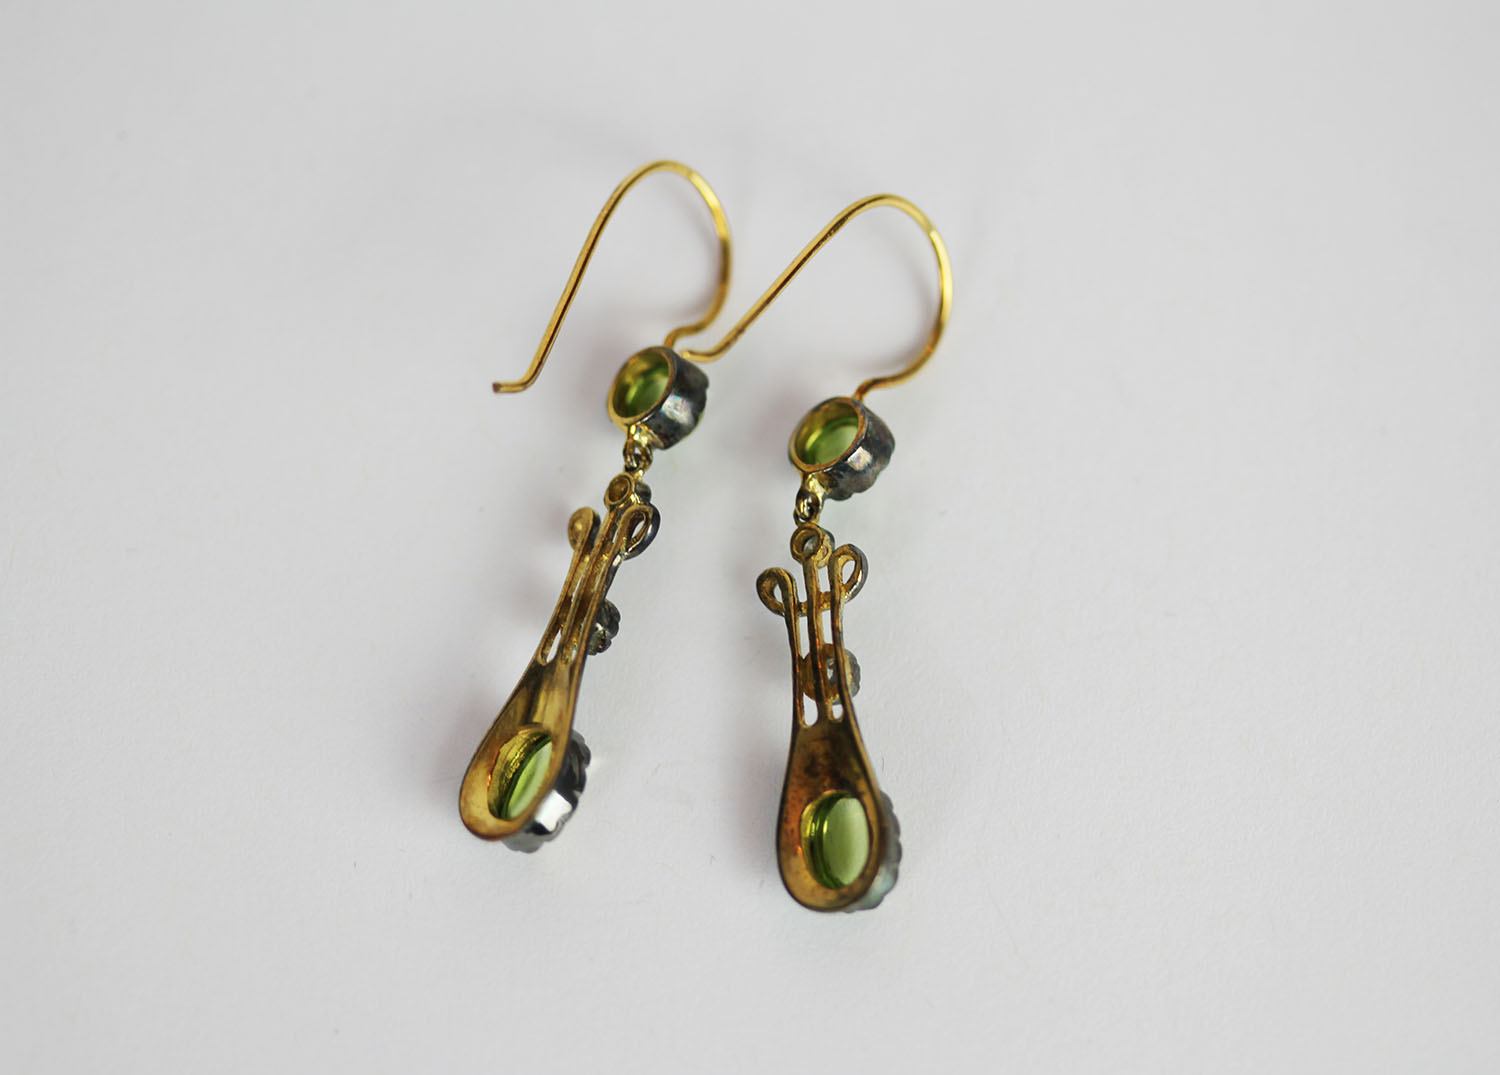 Pair of Peridot and Diamond drop earrings, each set with 2 cabochon cut peridots and 2 diamonds, - Image 2 of 3